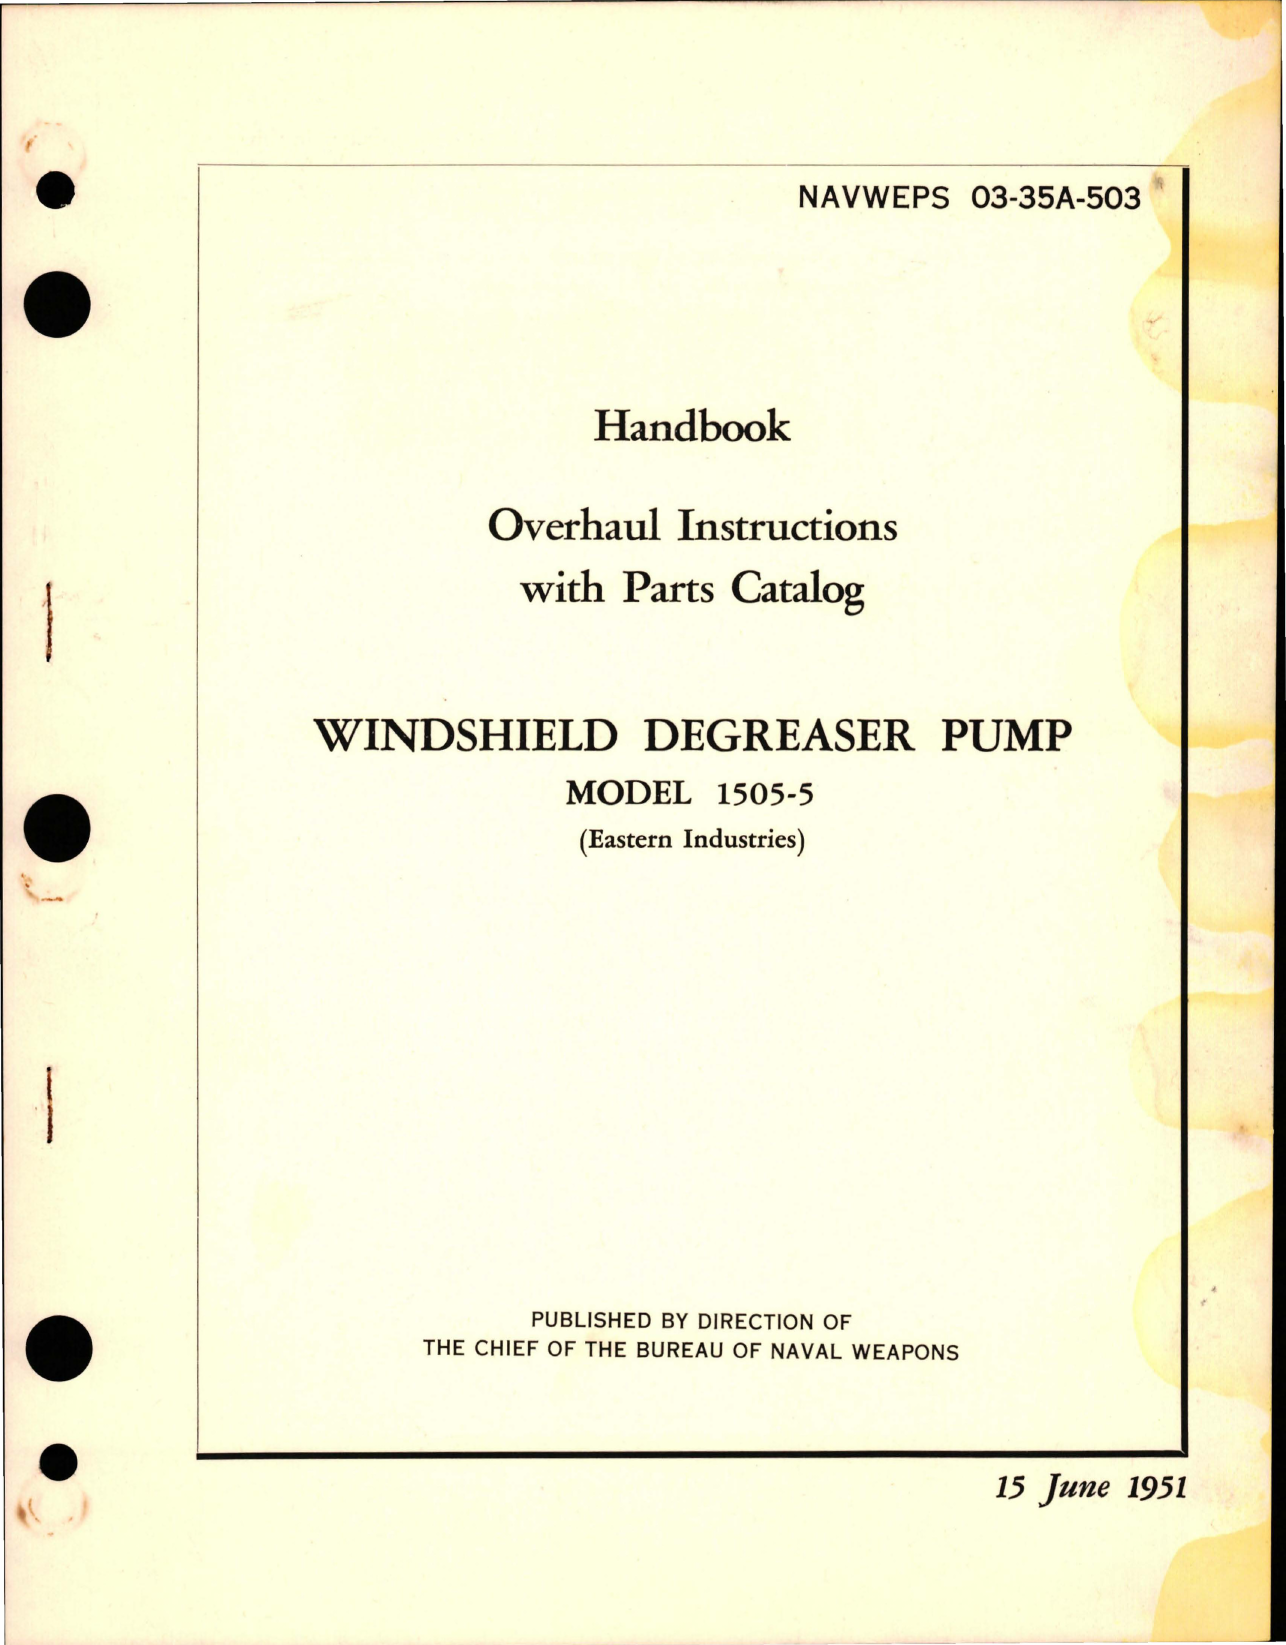 Sample page 1 from AirCorps Library document: Overhaul Instructions with Parts Catalog for Windshield Degreaser Pump - Model 1505-5 